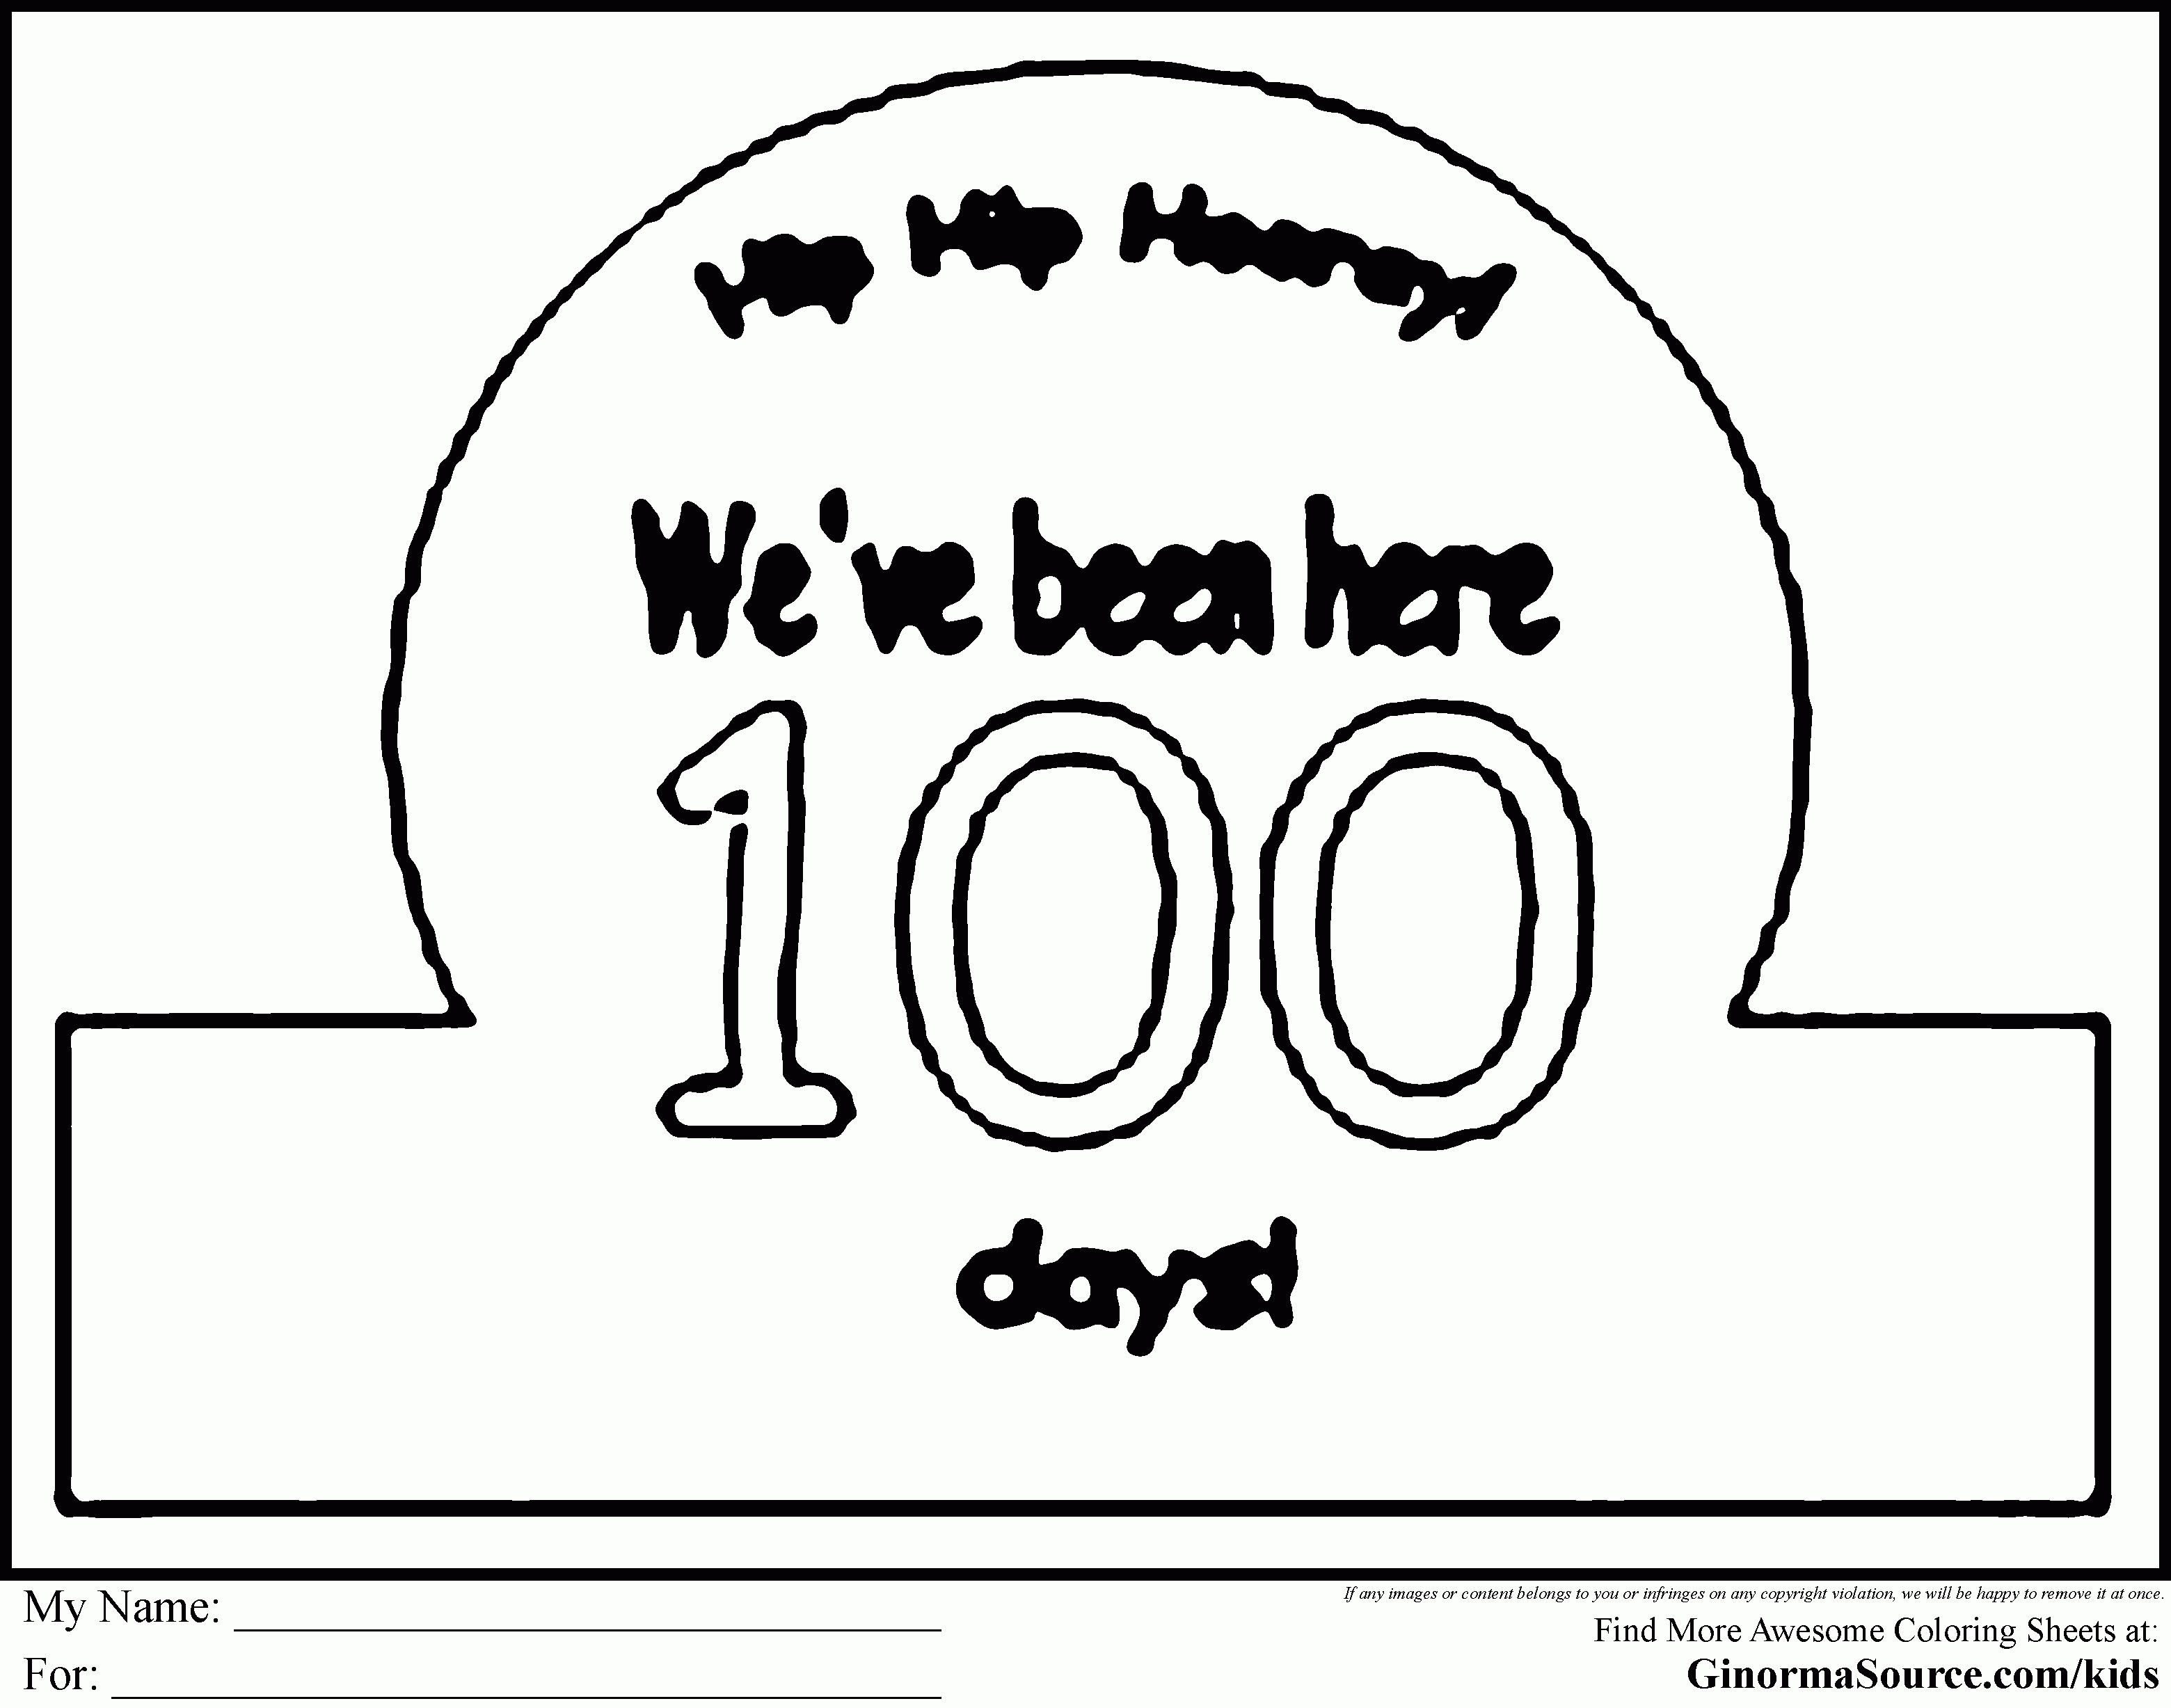 10 Pics Of 100 Days Of School Coloring Pages - 100 Day Of School - 100 Days Of School Free Printables